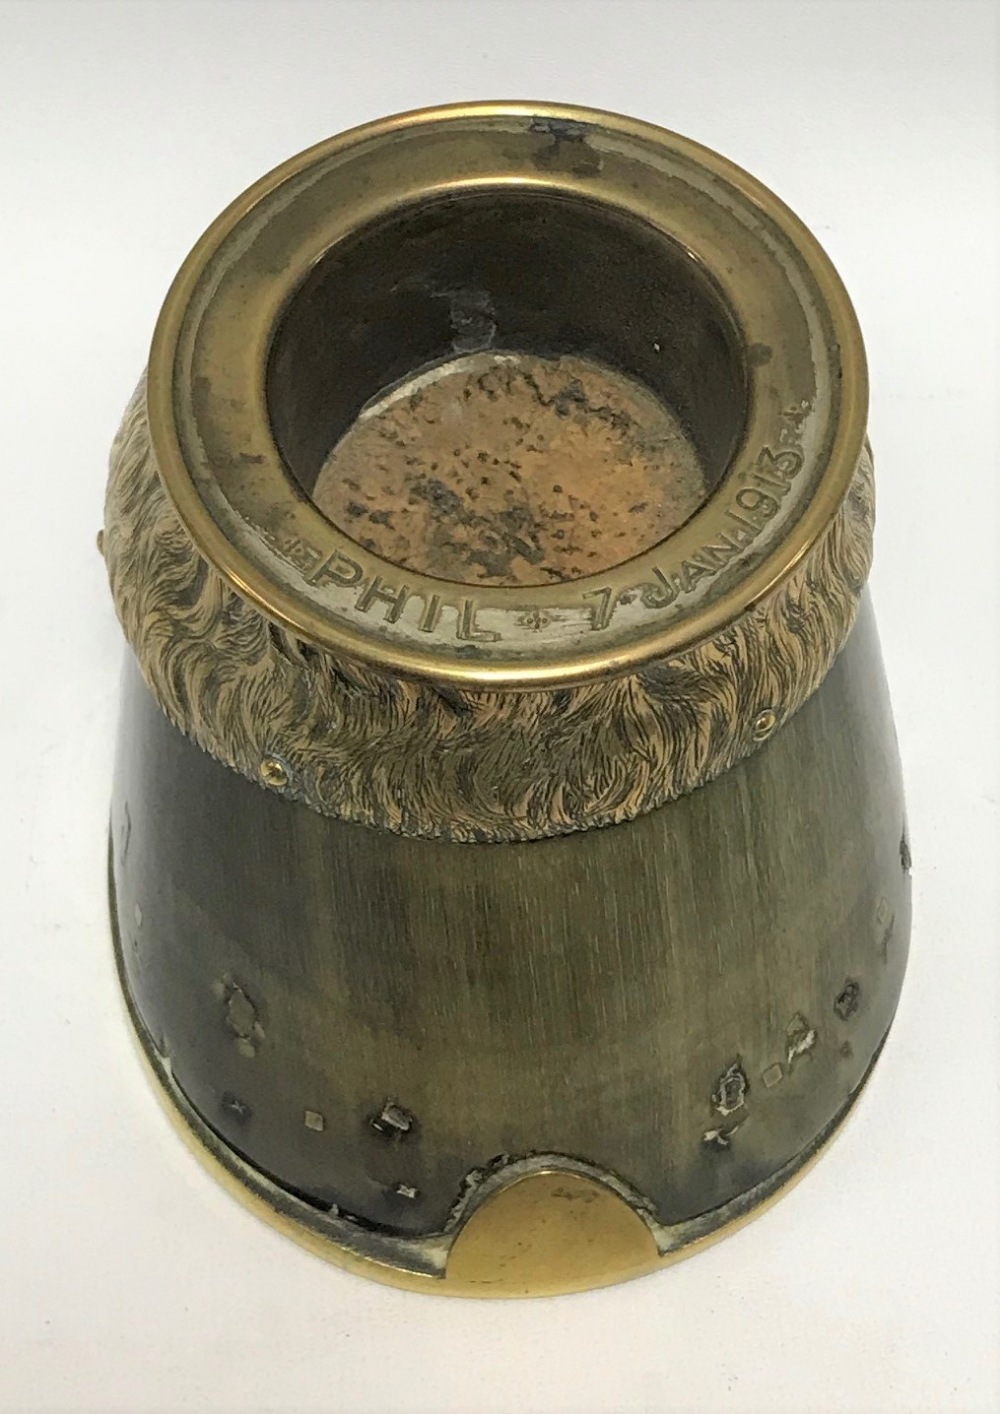 An early 20th century brass mounted horse hoof ashtray, the rim inscribed 'Phil 7 Jan 1913', with - Image 2 of 3